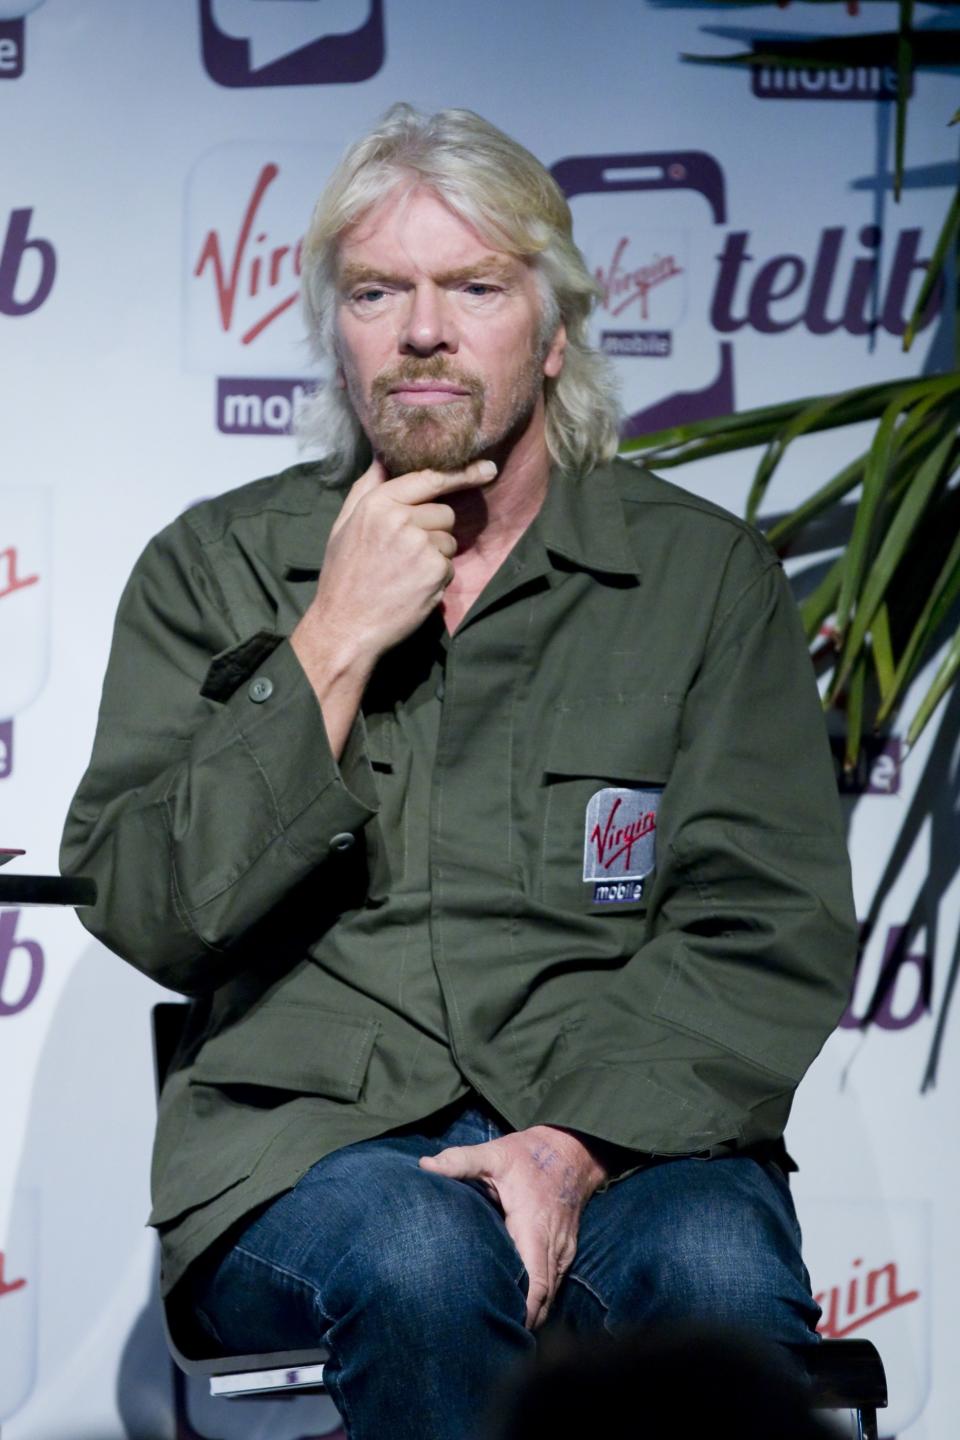 Business entrepreneur Branson attends a Virgin Mobile news conference to launch a new service in Paris